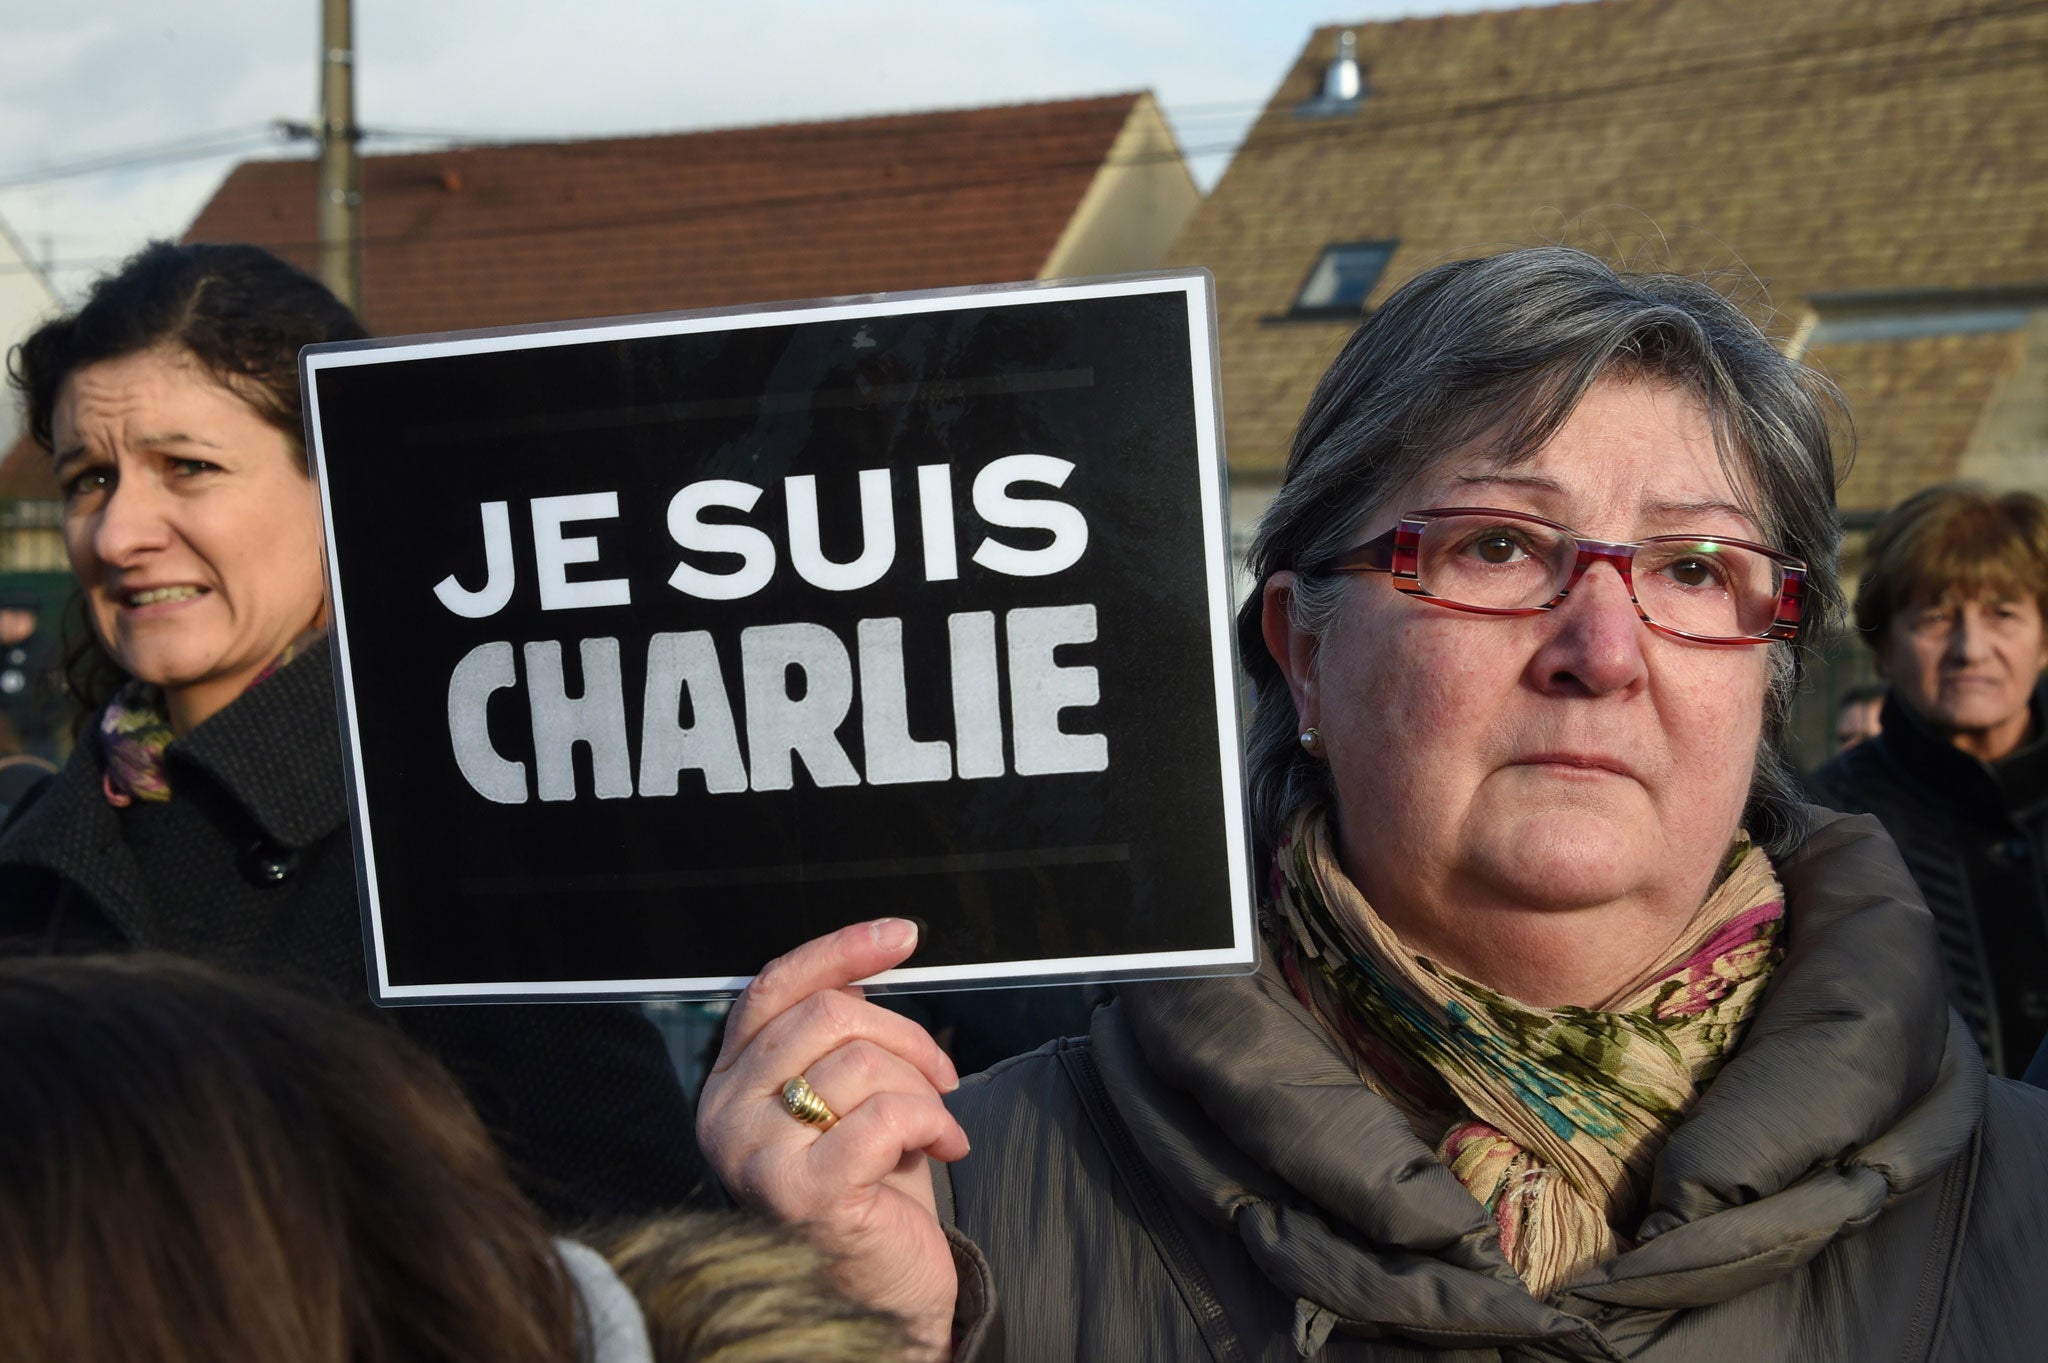 A woman holds a placard reading 'Je suis Charlie' as she attends the funeral of French cartoonist and Charlie Hebdo editor Stephane 'Charb' Charbonnier, on 16 January 2015 in Pontoise, outside Paris.